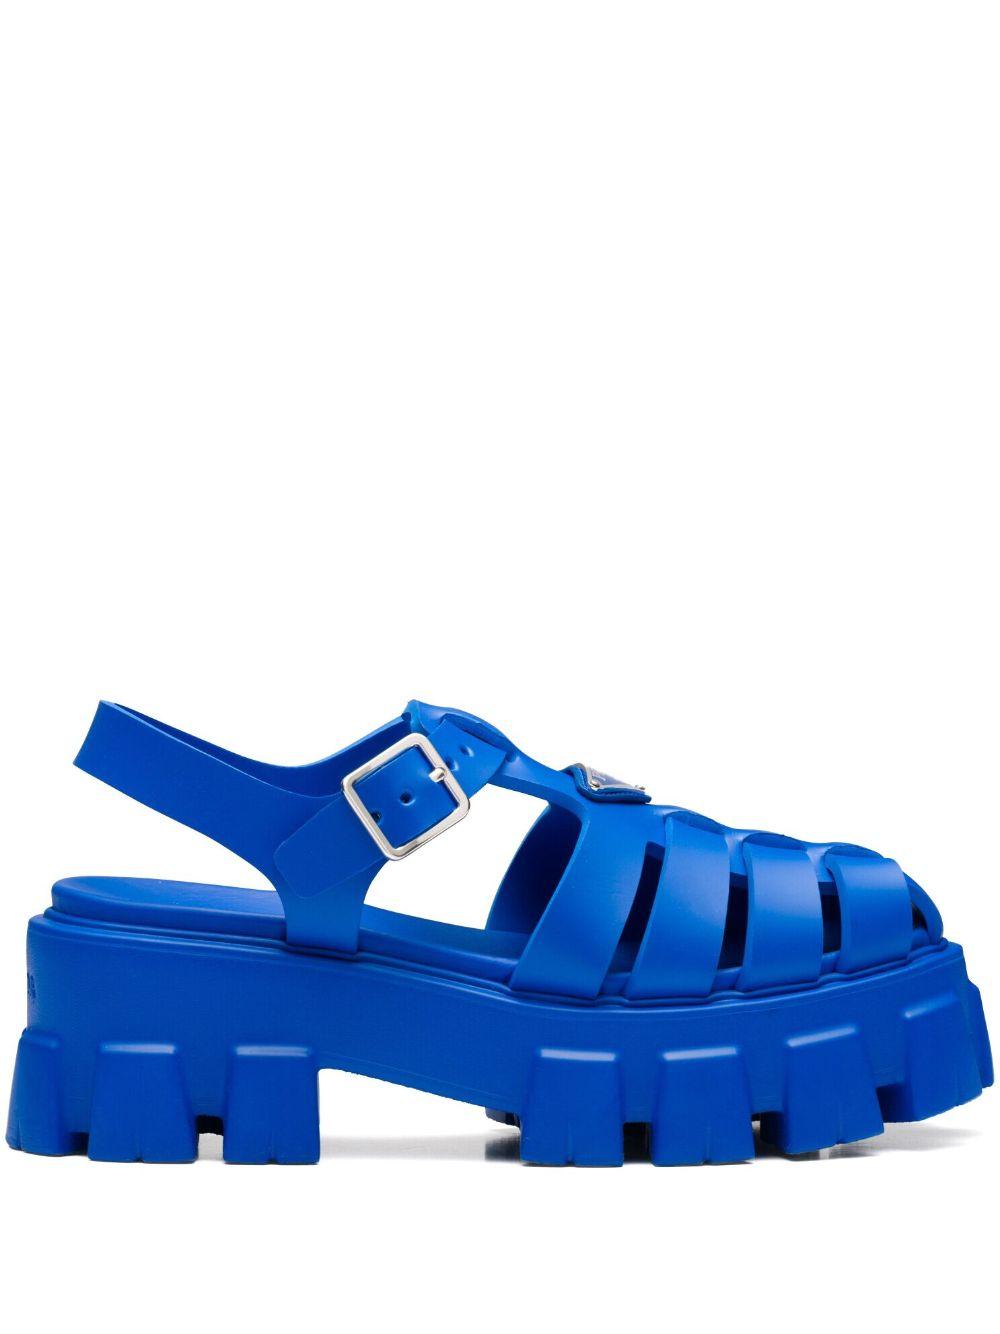 Prada Monolith Caged Rubber Sandals in Blue | Lyst